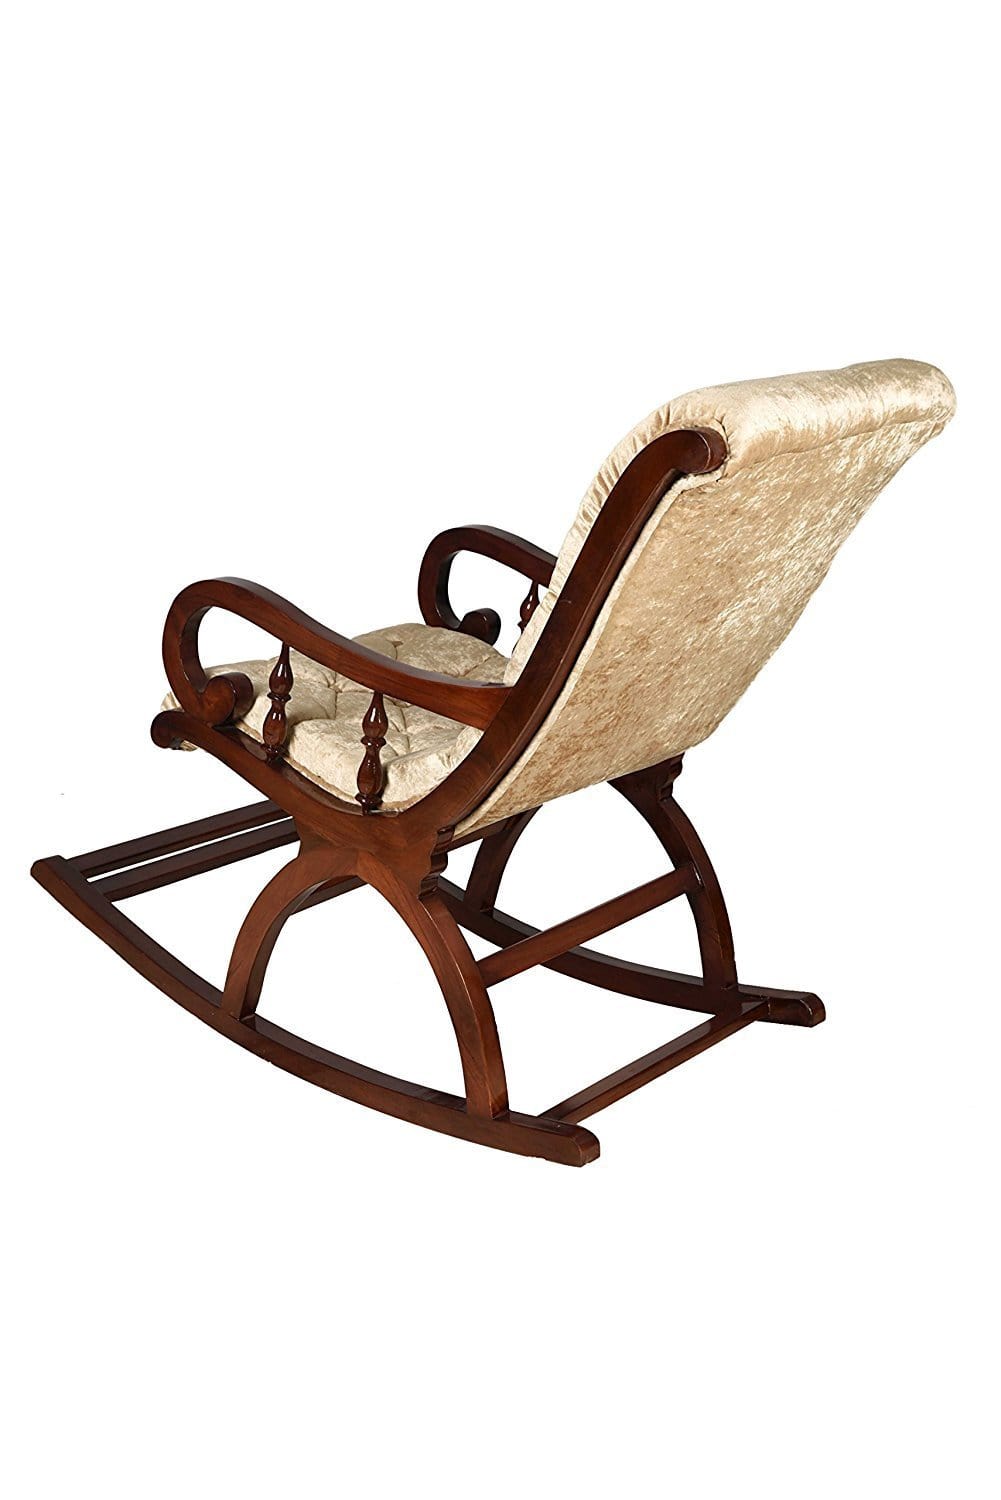 Royal Look Hand Crafted Rocking Chair in Teak Wood with Cushion for Living Room Garden Lounge Wooden Hand Crafted Rocking Chair